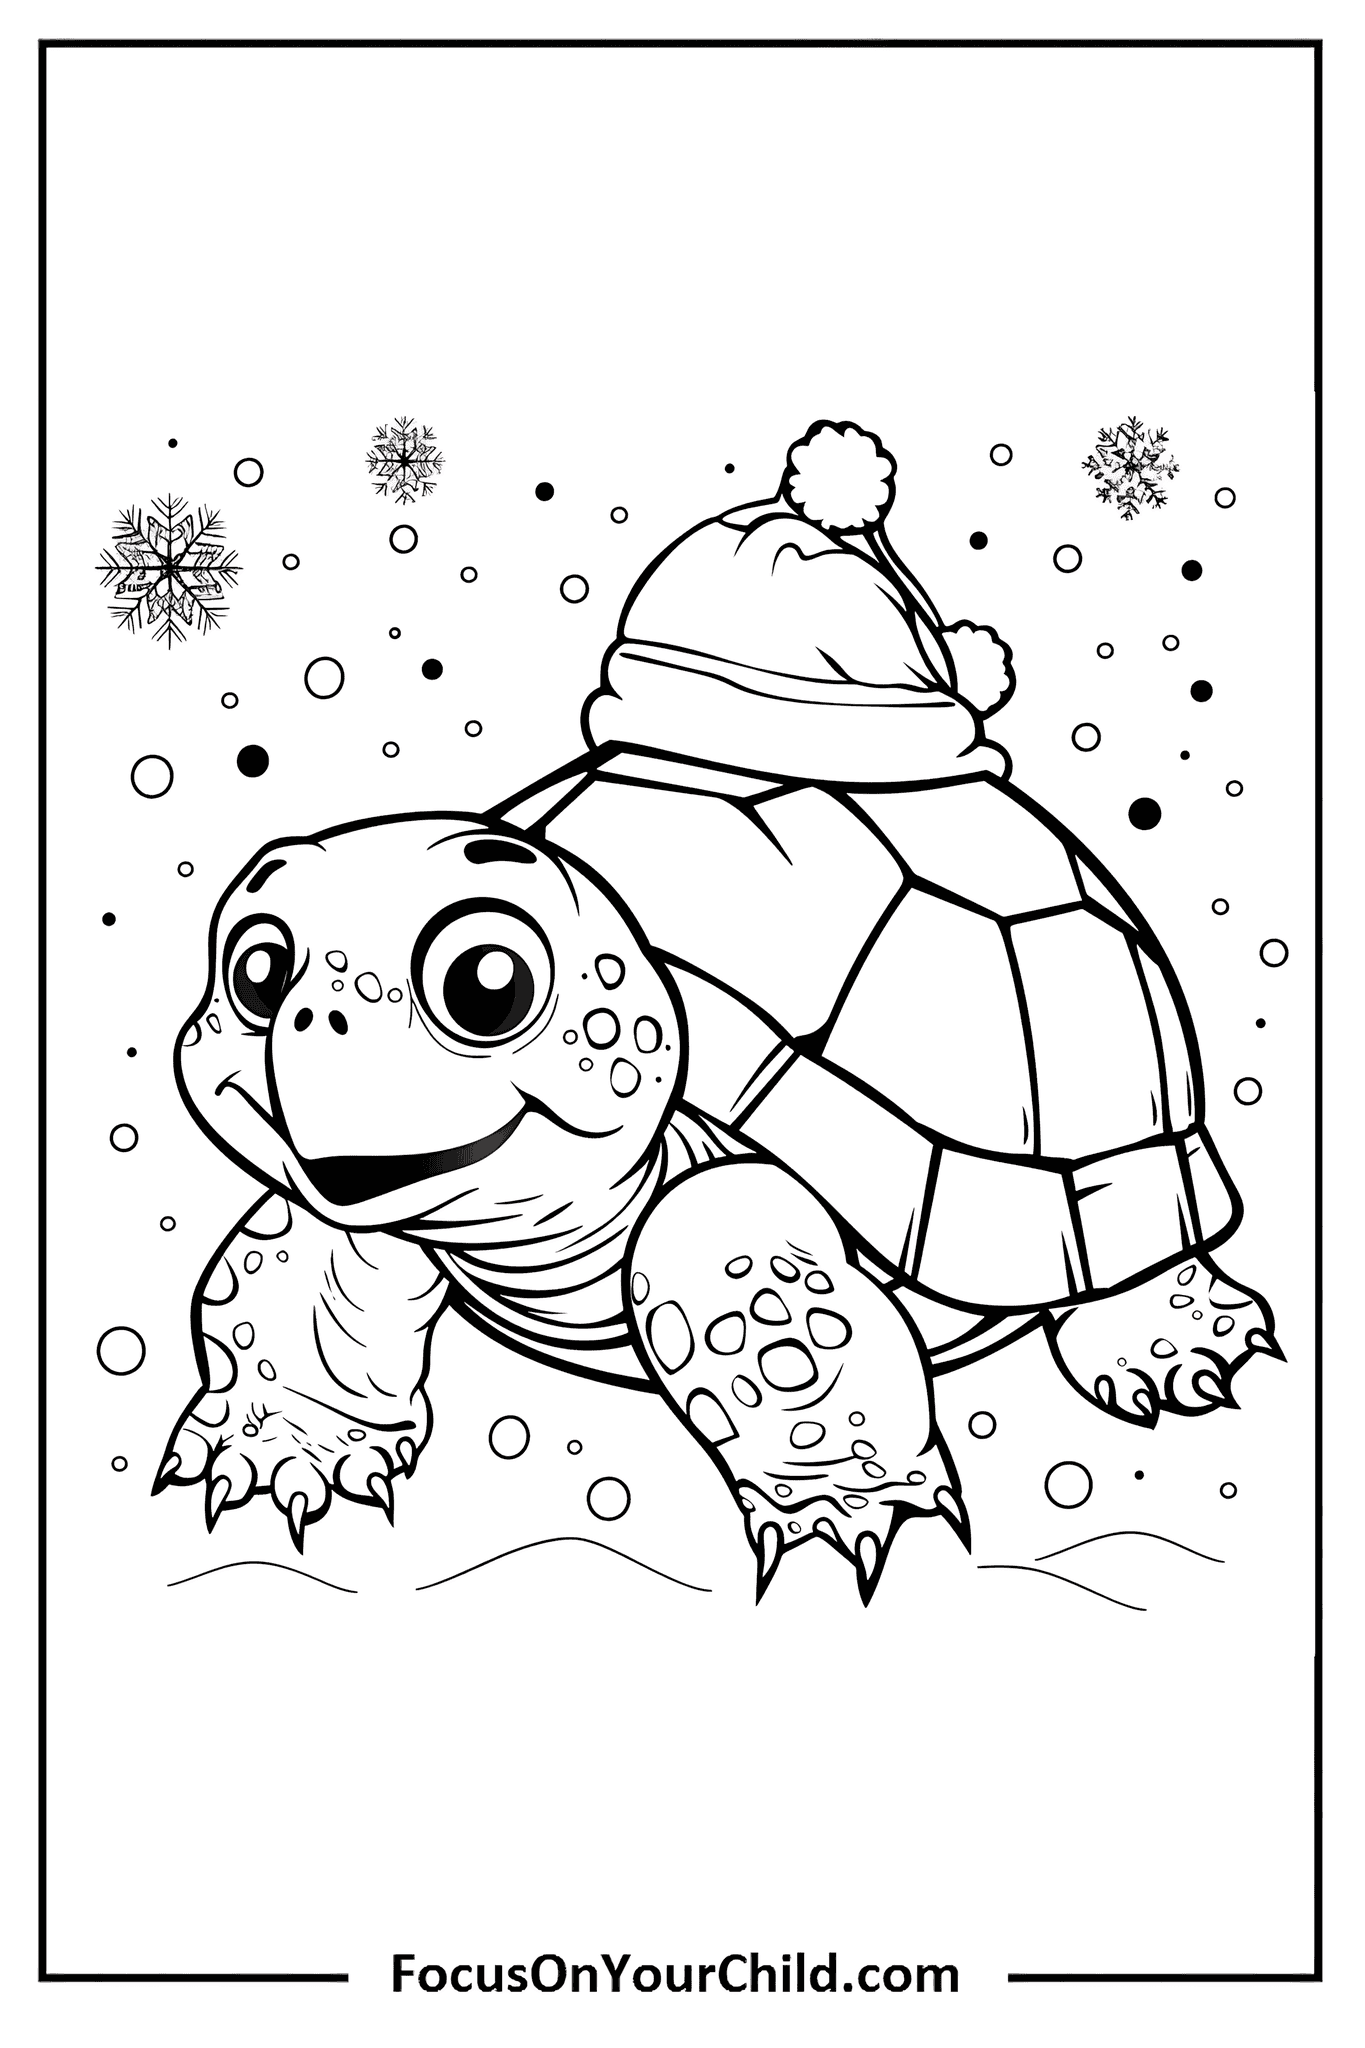 Cheerful turtle wearing winter hat surrounded by snowflakes, perfect for coloring.